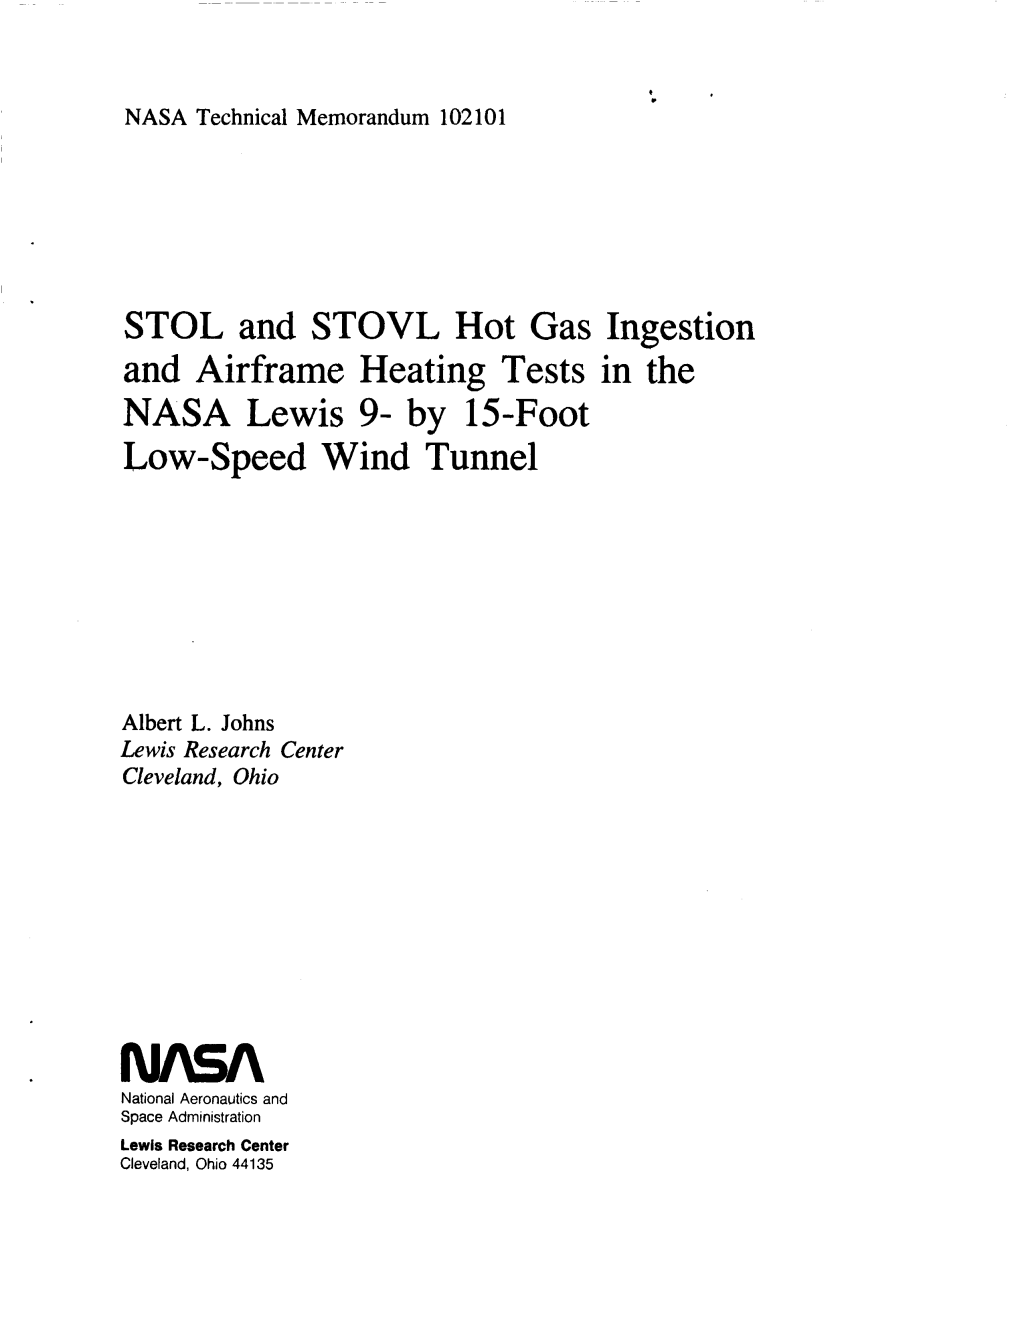 STOL and STOVL Hot Gas Ingestion and Airframe Heating Tests in the NASA Lewis 9- by 15-Foot Low-Speed Wind Tunnel